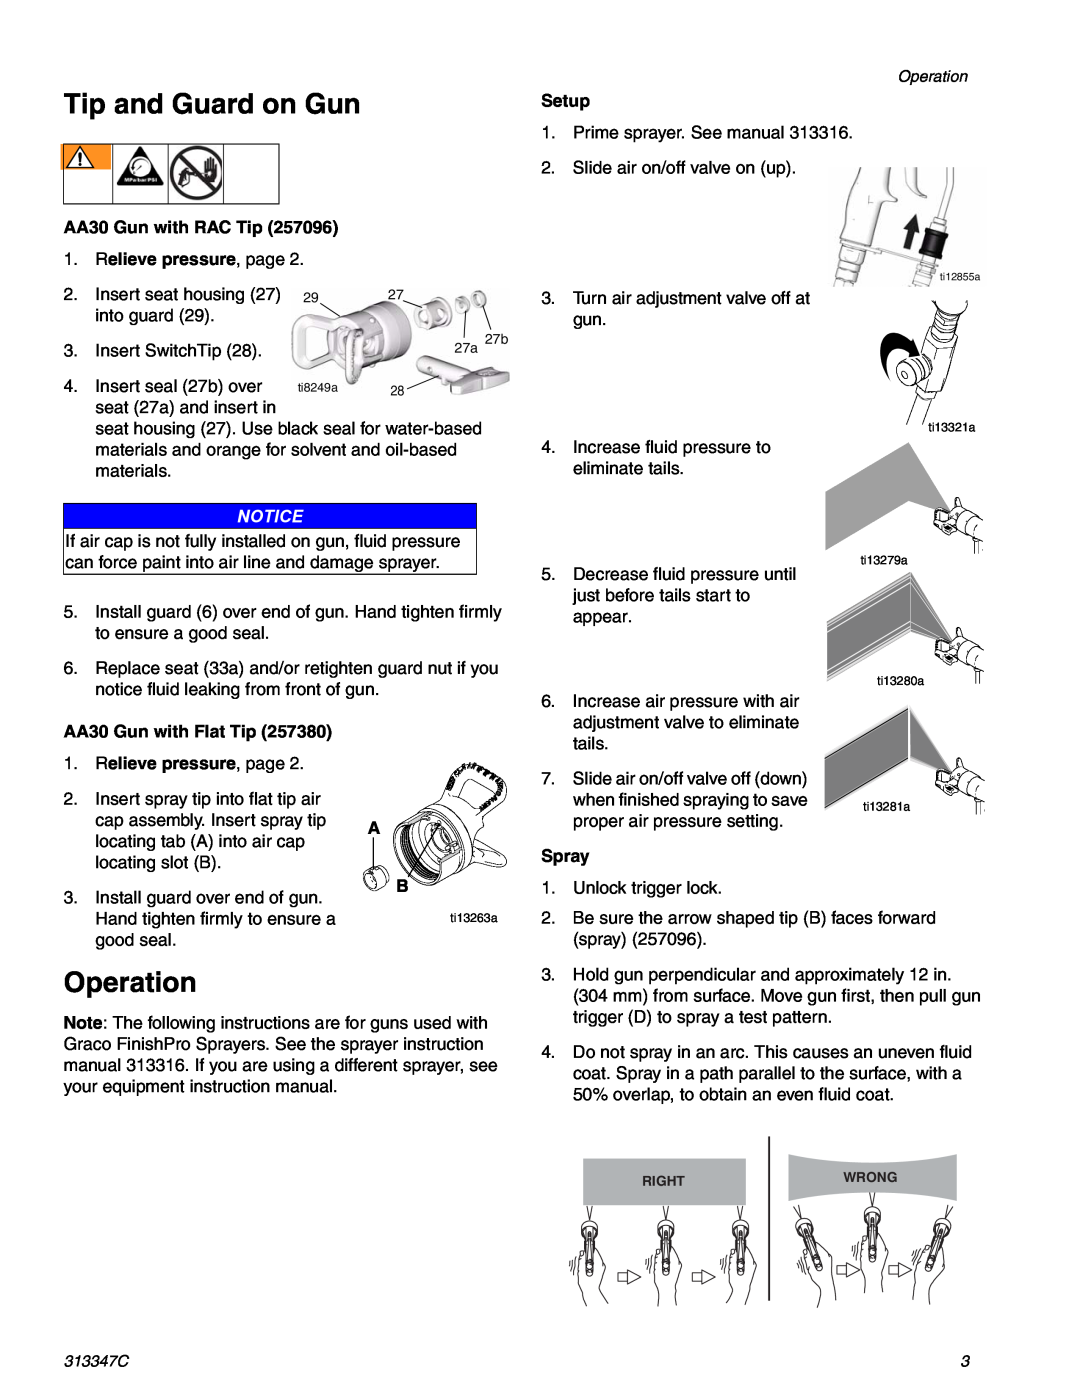 Graco Inc 257380, AA30, 313347C, 257096 important safety instructions Tip and Guard on Gun, Operation 